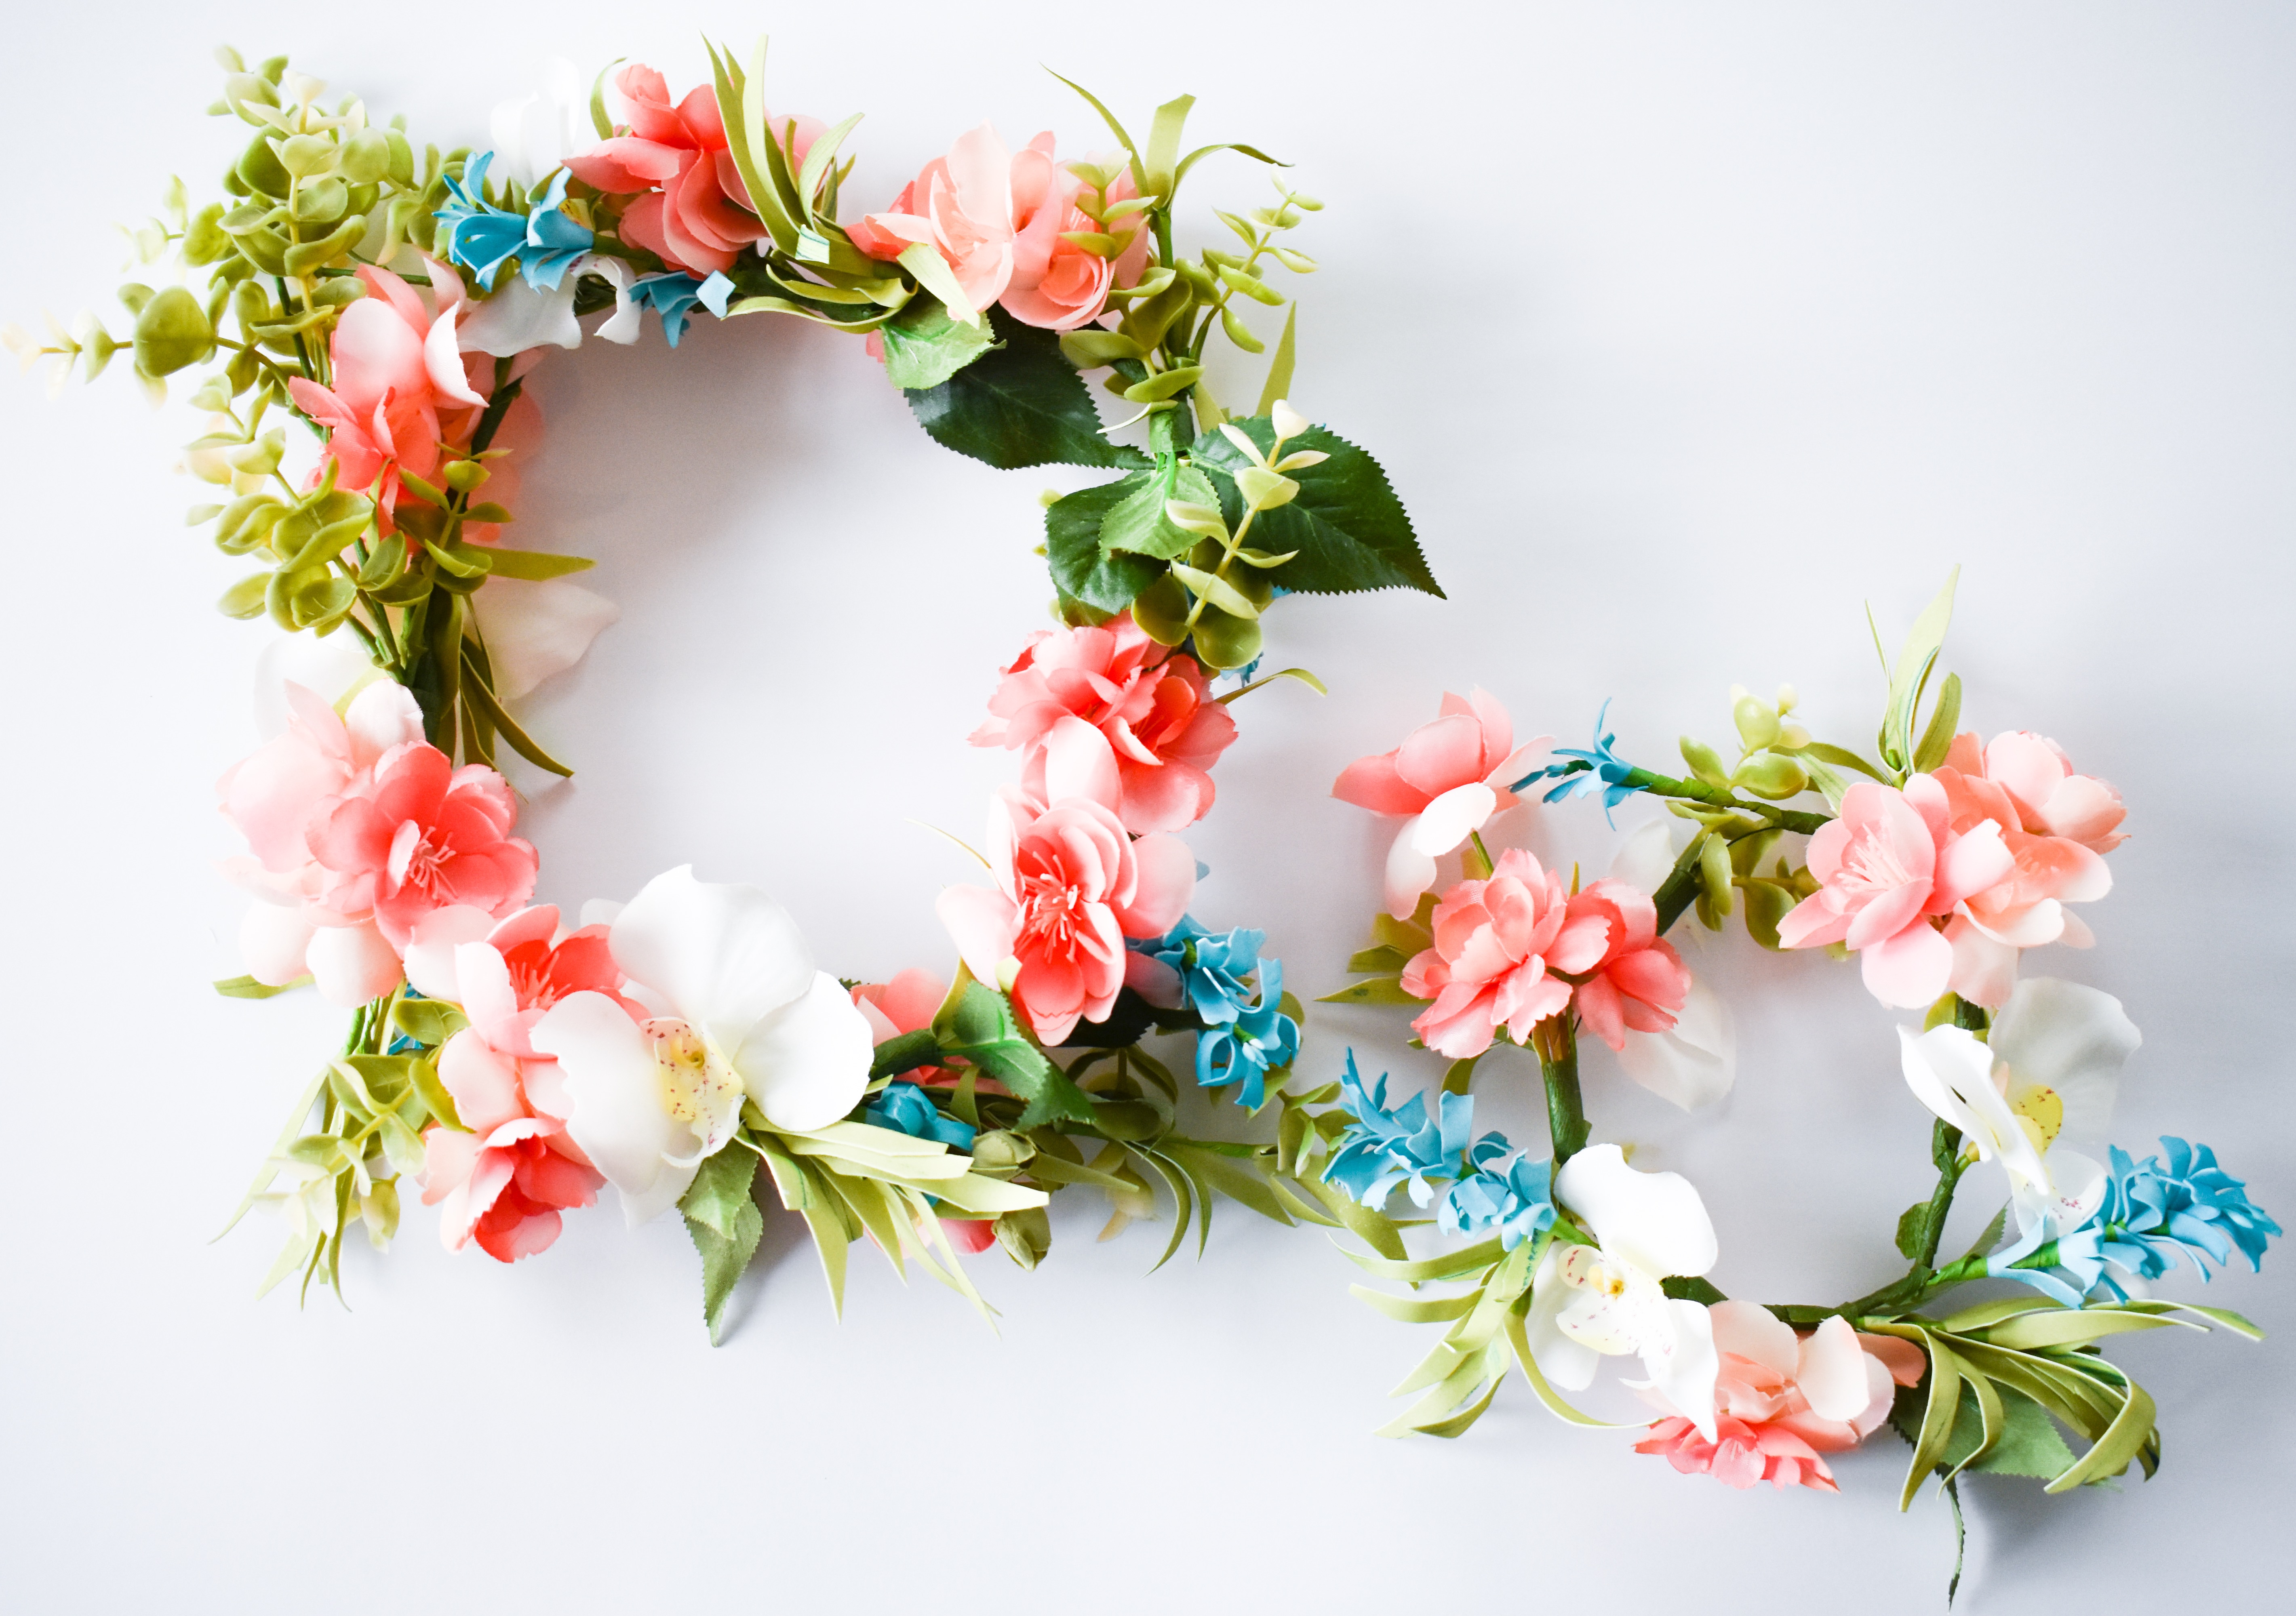 How to Make a Flower Crown with Fake Flowers